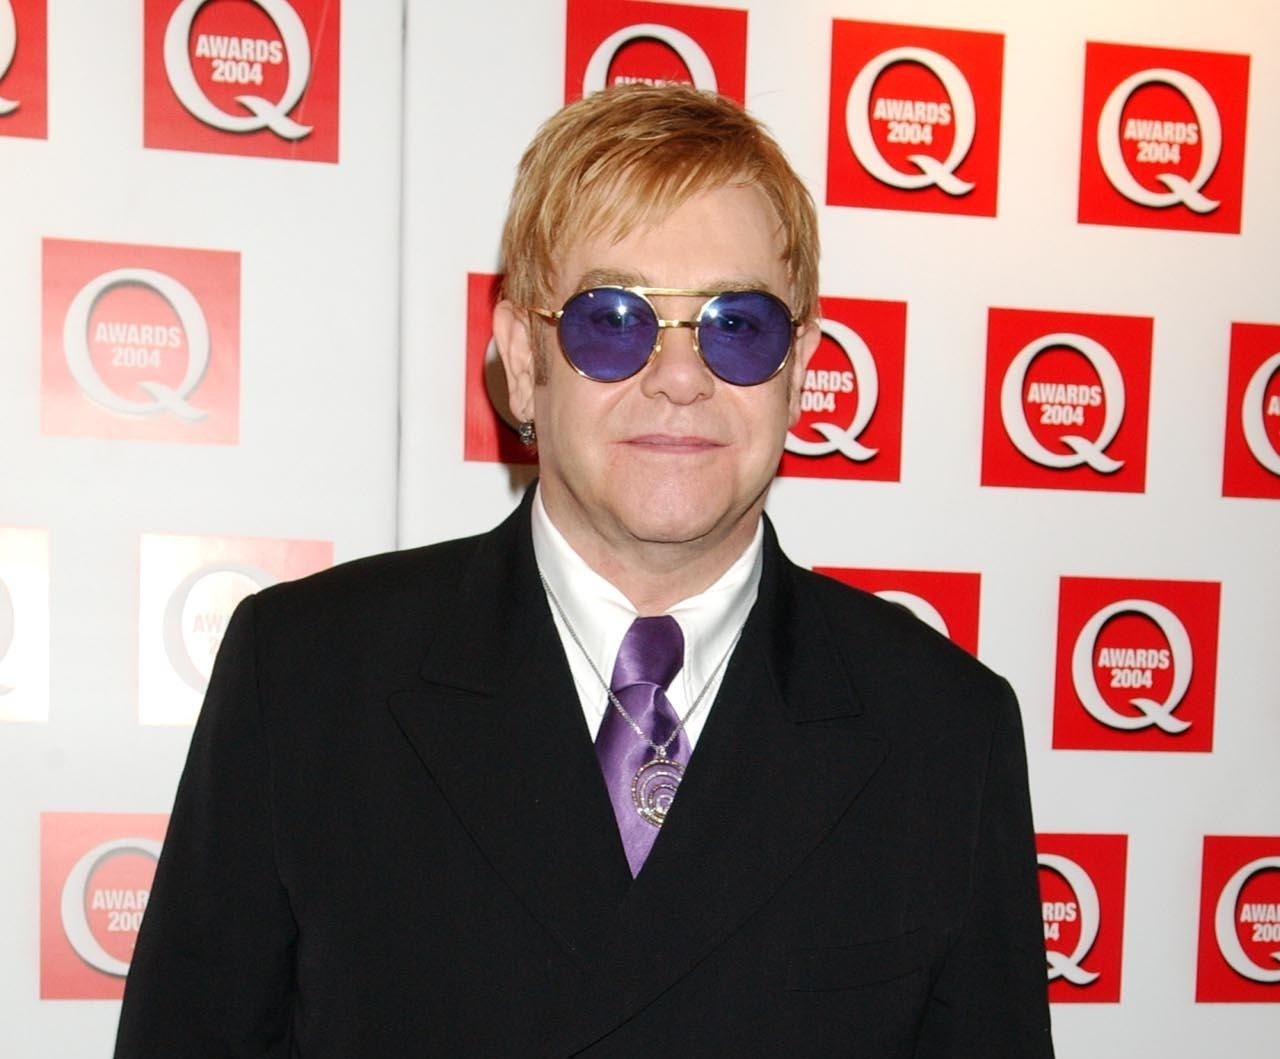 Elton John, in a black suit with purple tie and purple sunglasses, poses on the red carpet of the 2004 Q Awards